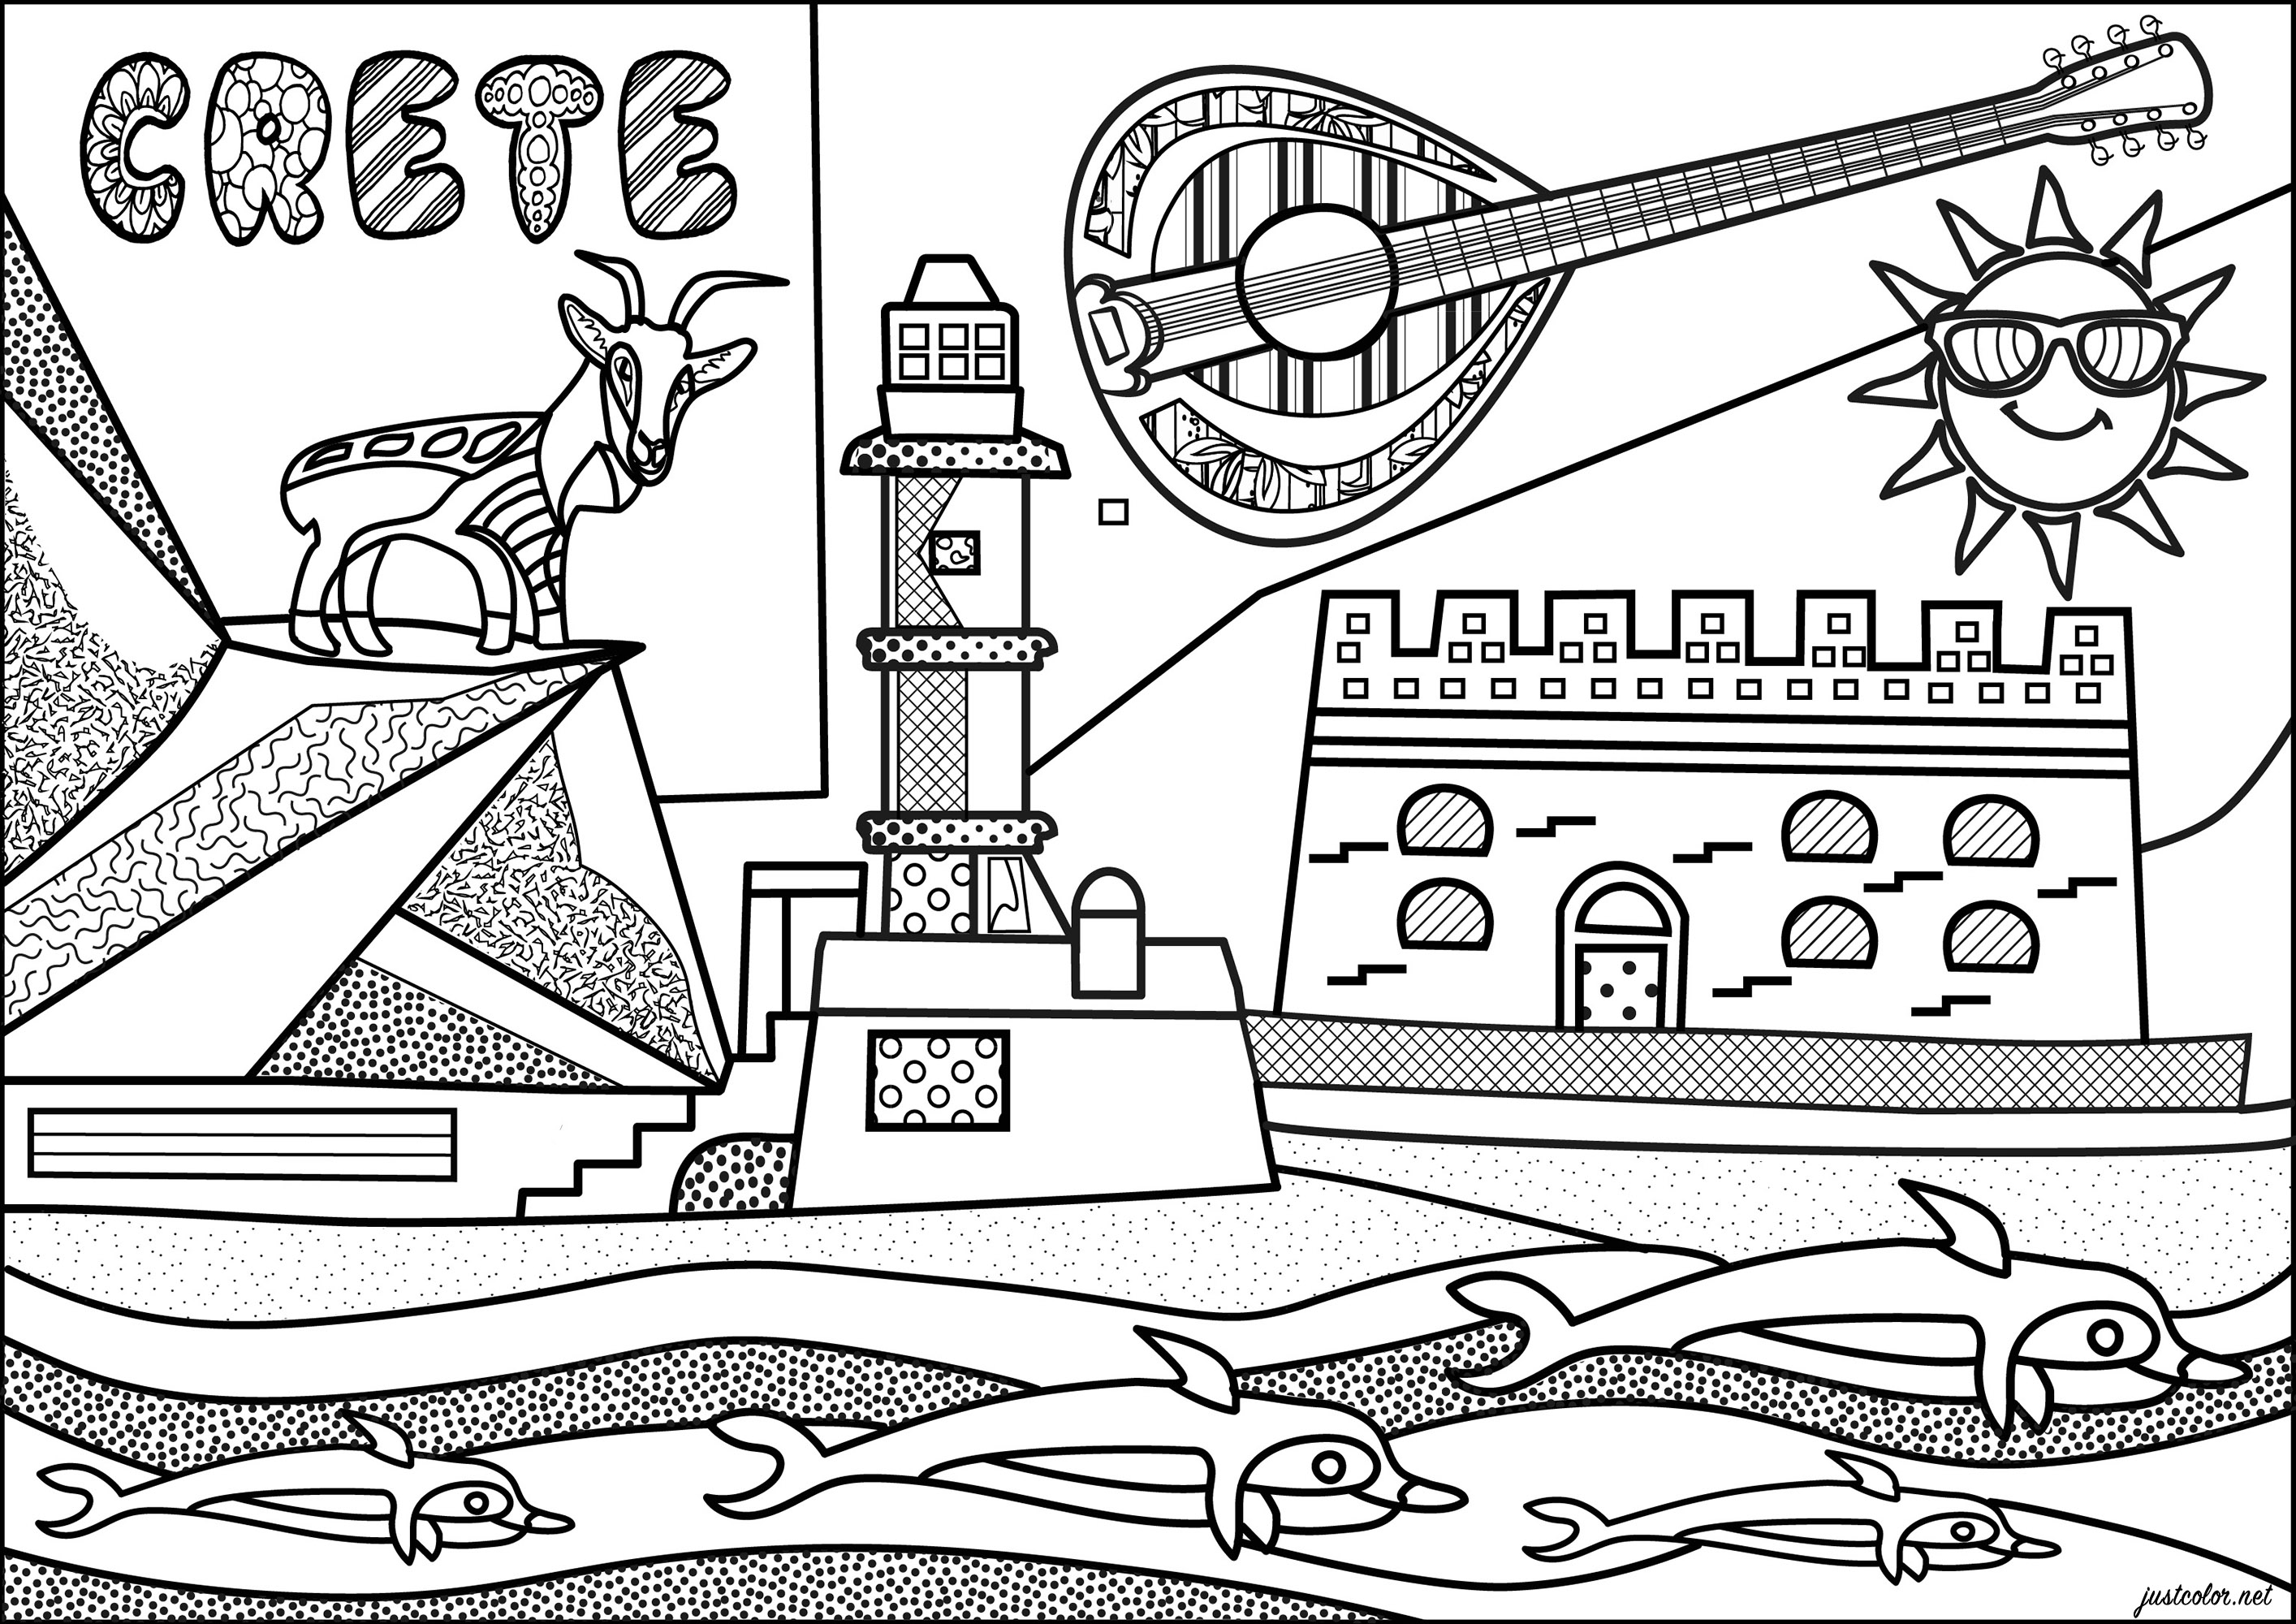 Coloring inspired by the Greek island of Crete, with various typical monuments. This coloring page features the fortress of Heraklion, the Egyptian lighthouse at Chania and a famous Kri-kri goat.An original illustration inspired by the 'Naïve art' style, Artist : Morgan